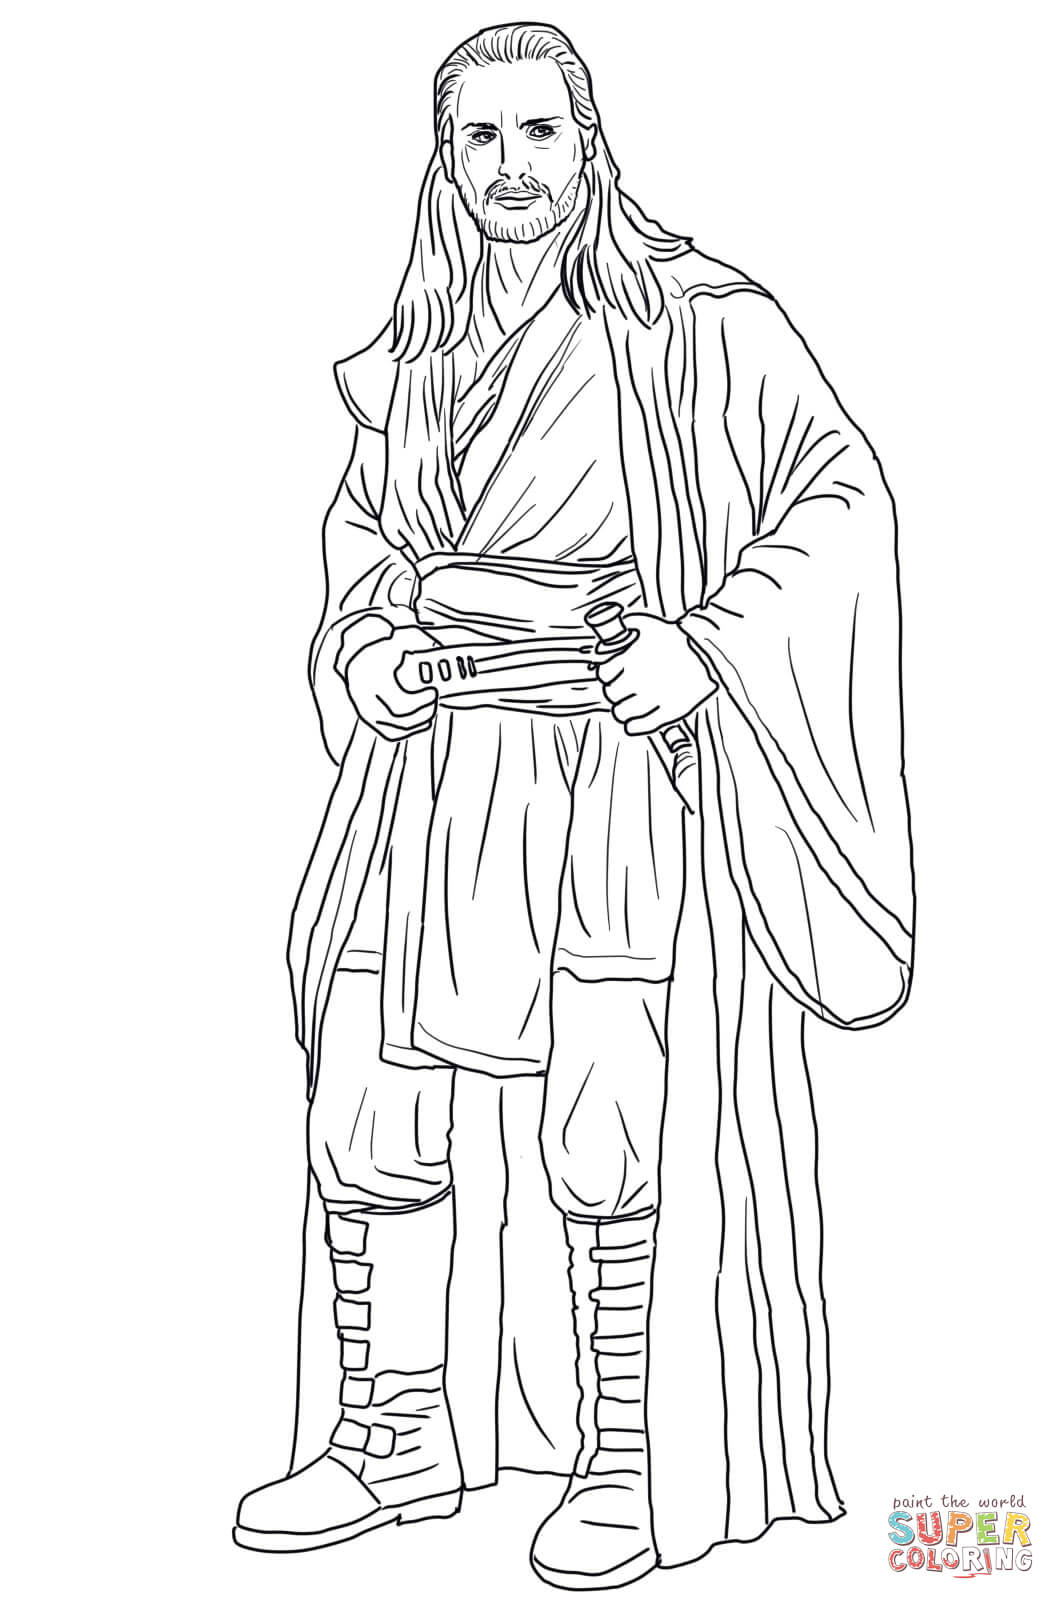 Qui gon jinn coloring page free printable coloring pages